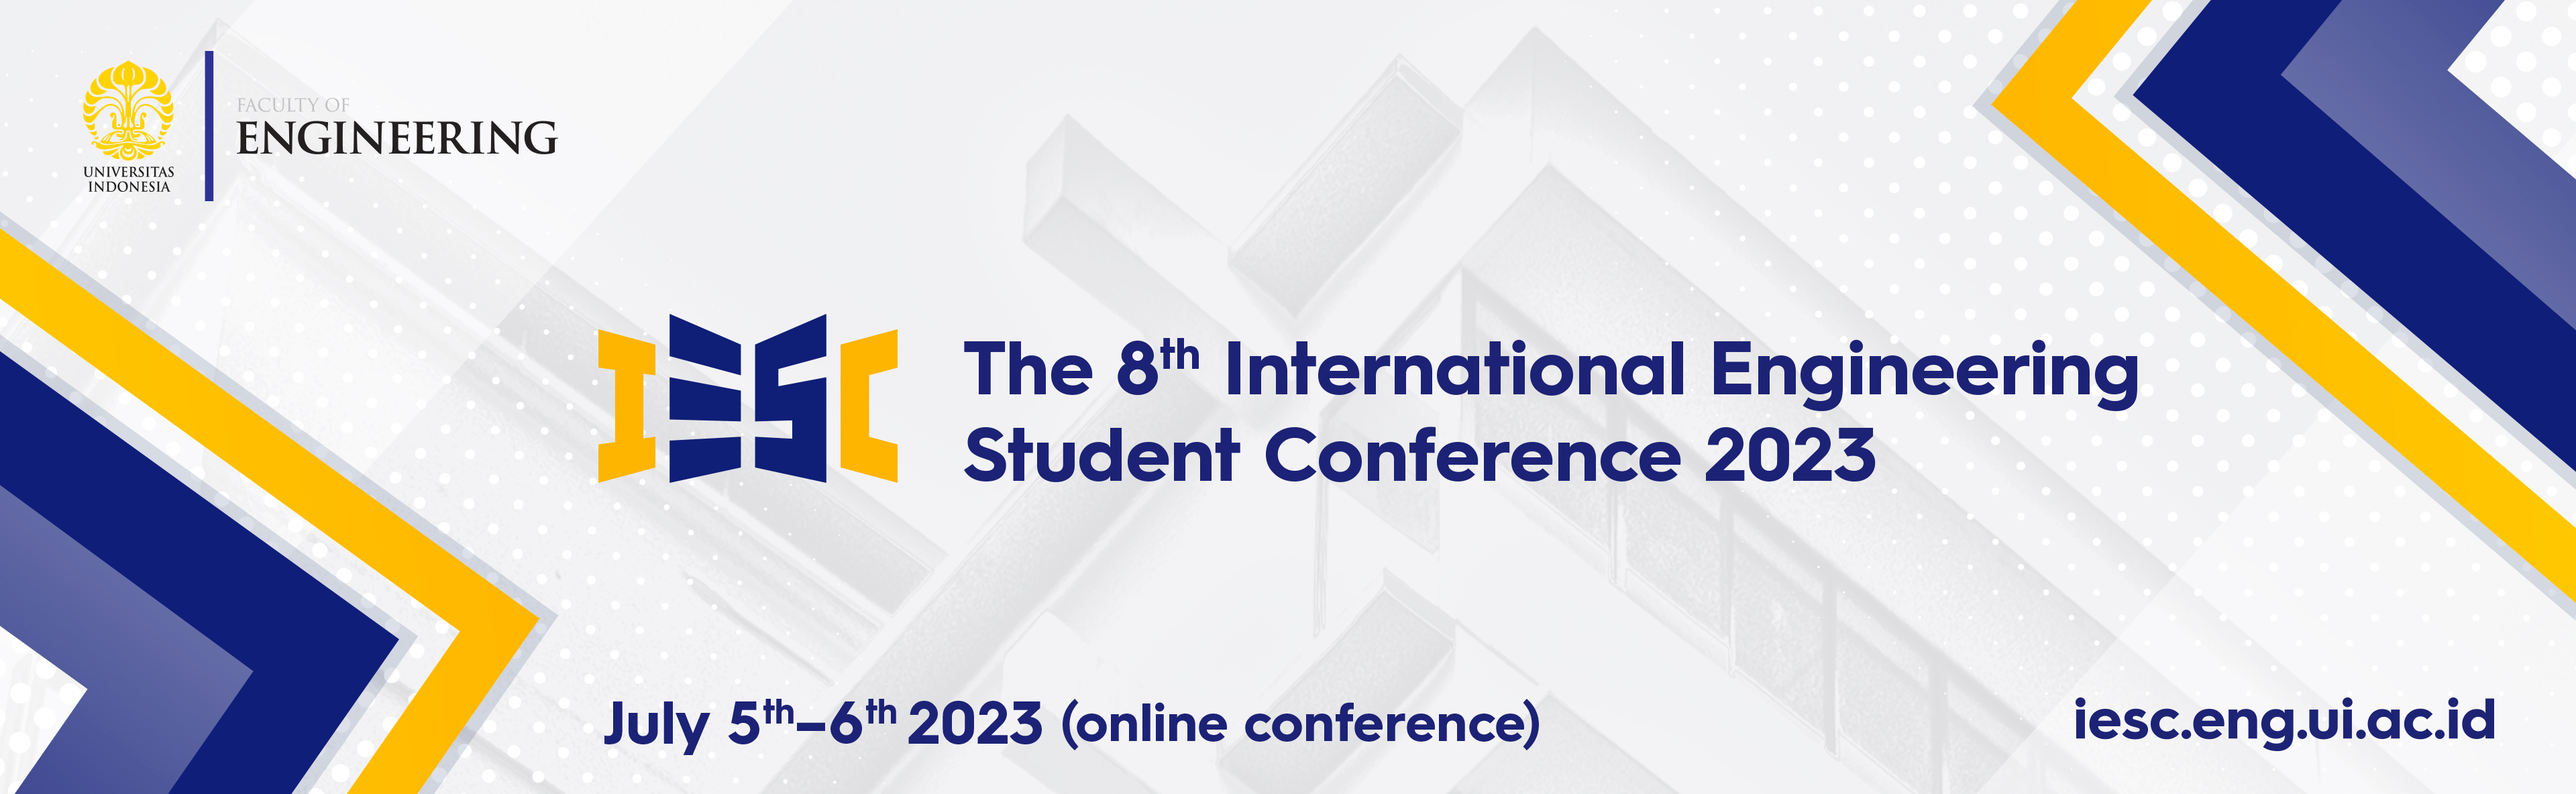 IESC 2023 The 8th International Engineering Students Conference 2023